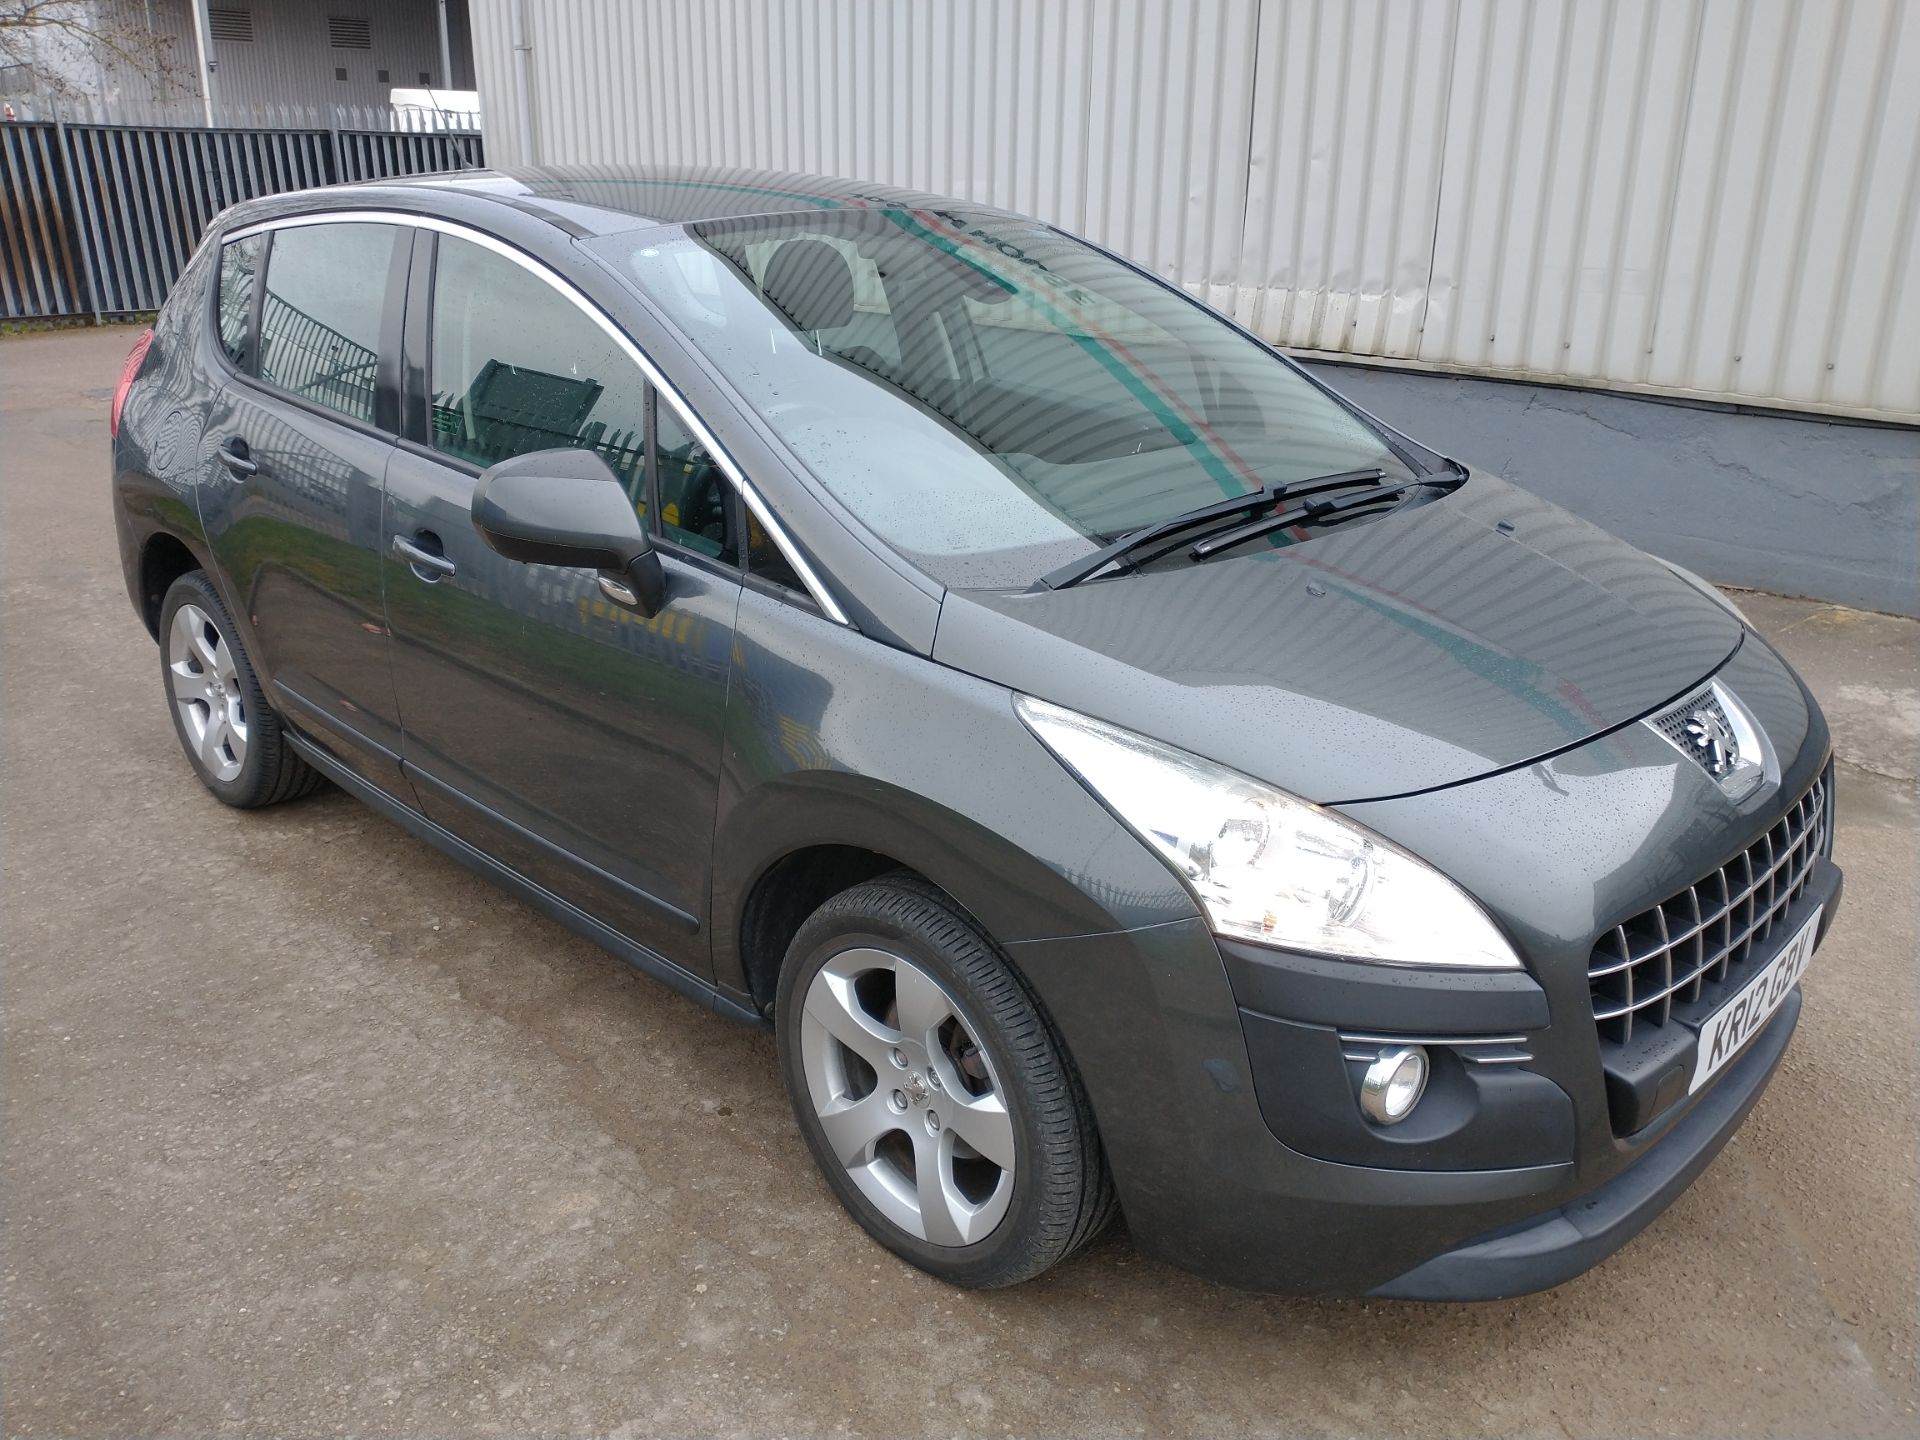 2012 Peugeot 3008 Active HDI 1.6 5DR SUV - CL505 - NO VAT ON THE HAMM - Image 16 of 19